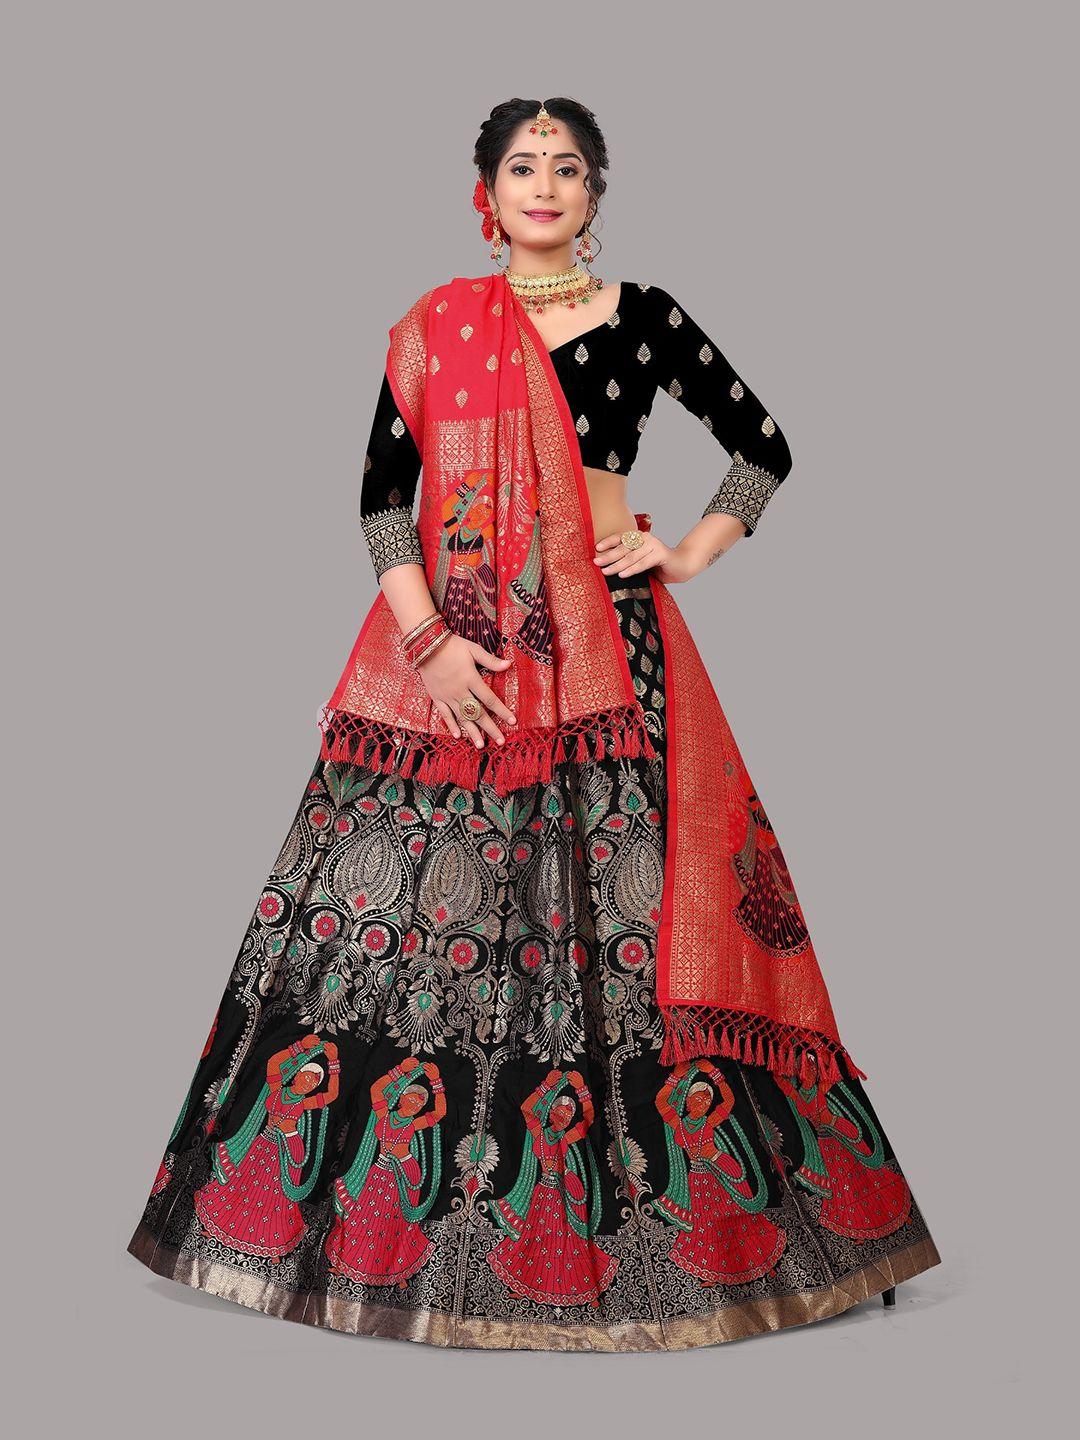 warthy ent black & red semi-stitched lehenga & unstitched blouse with dupatta